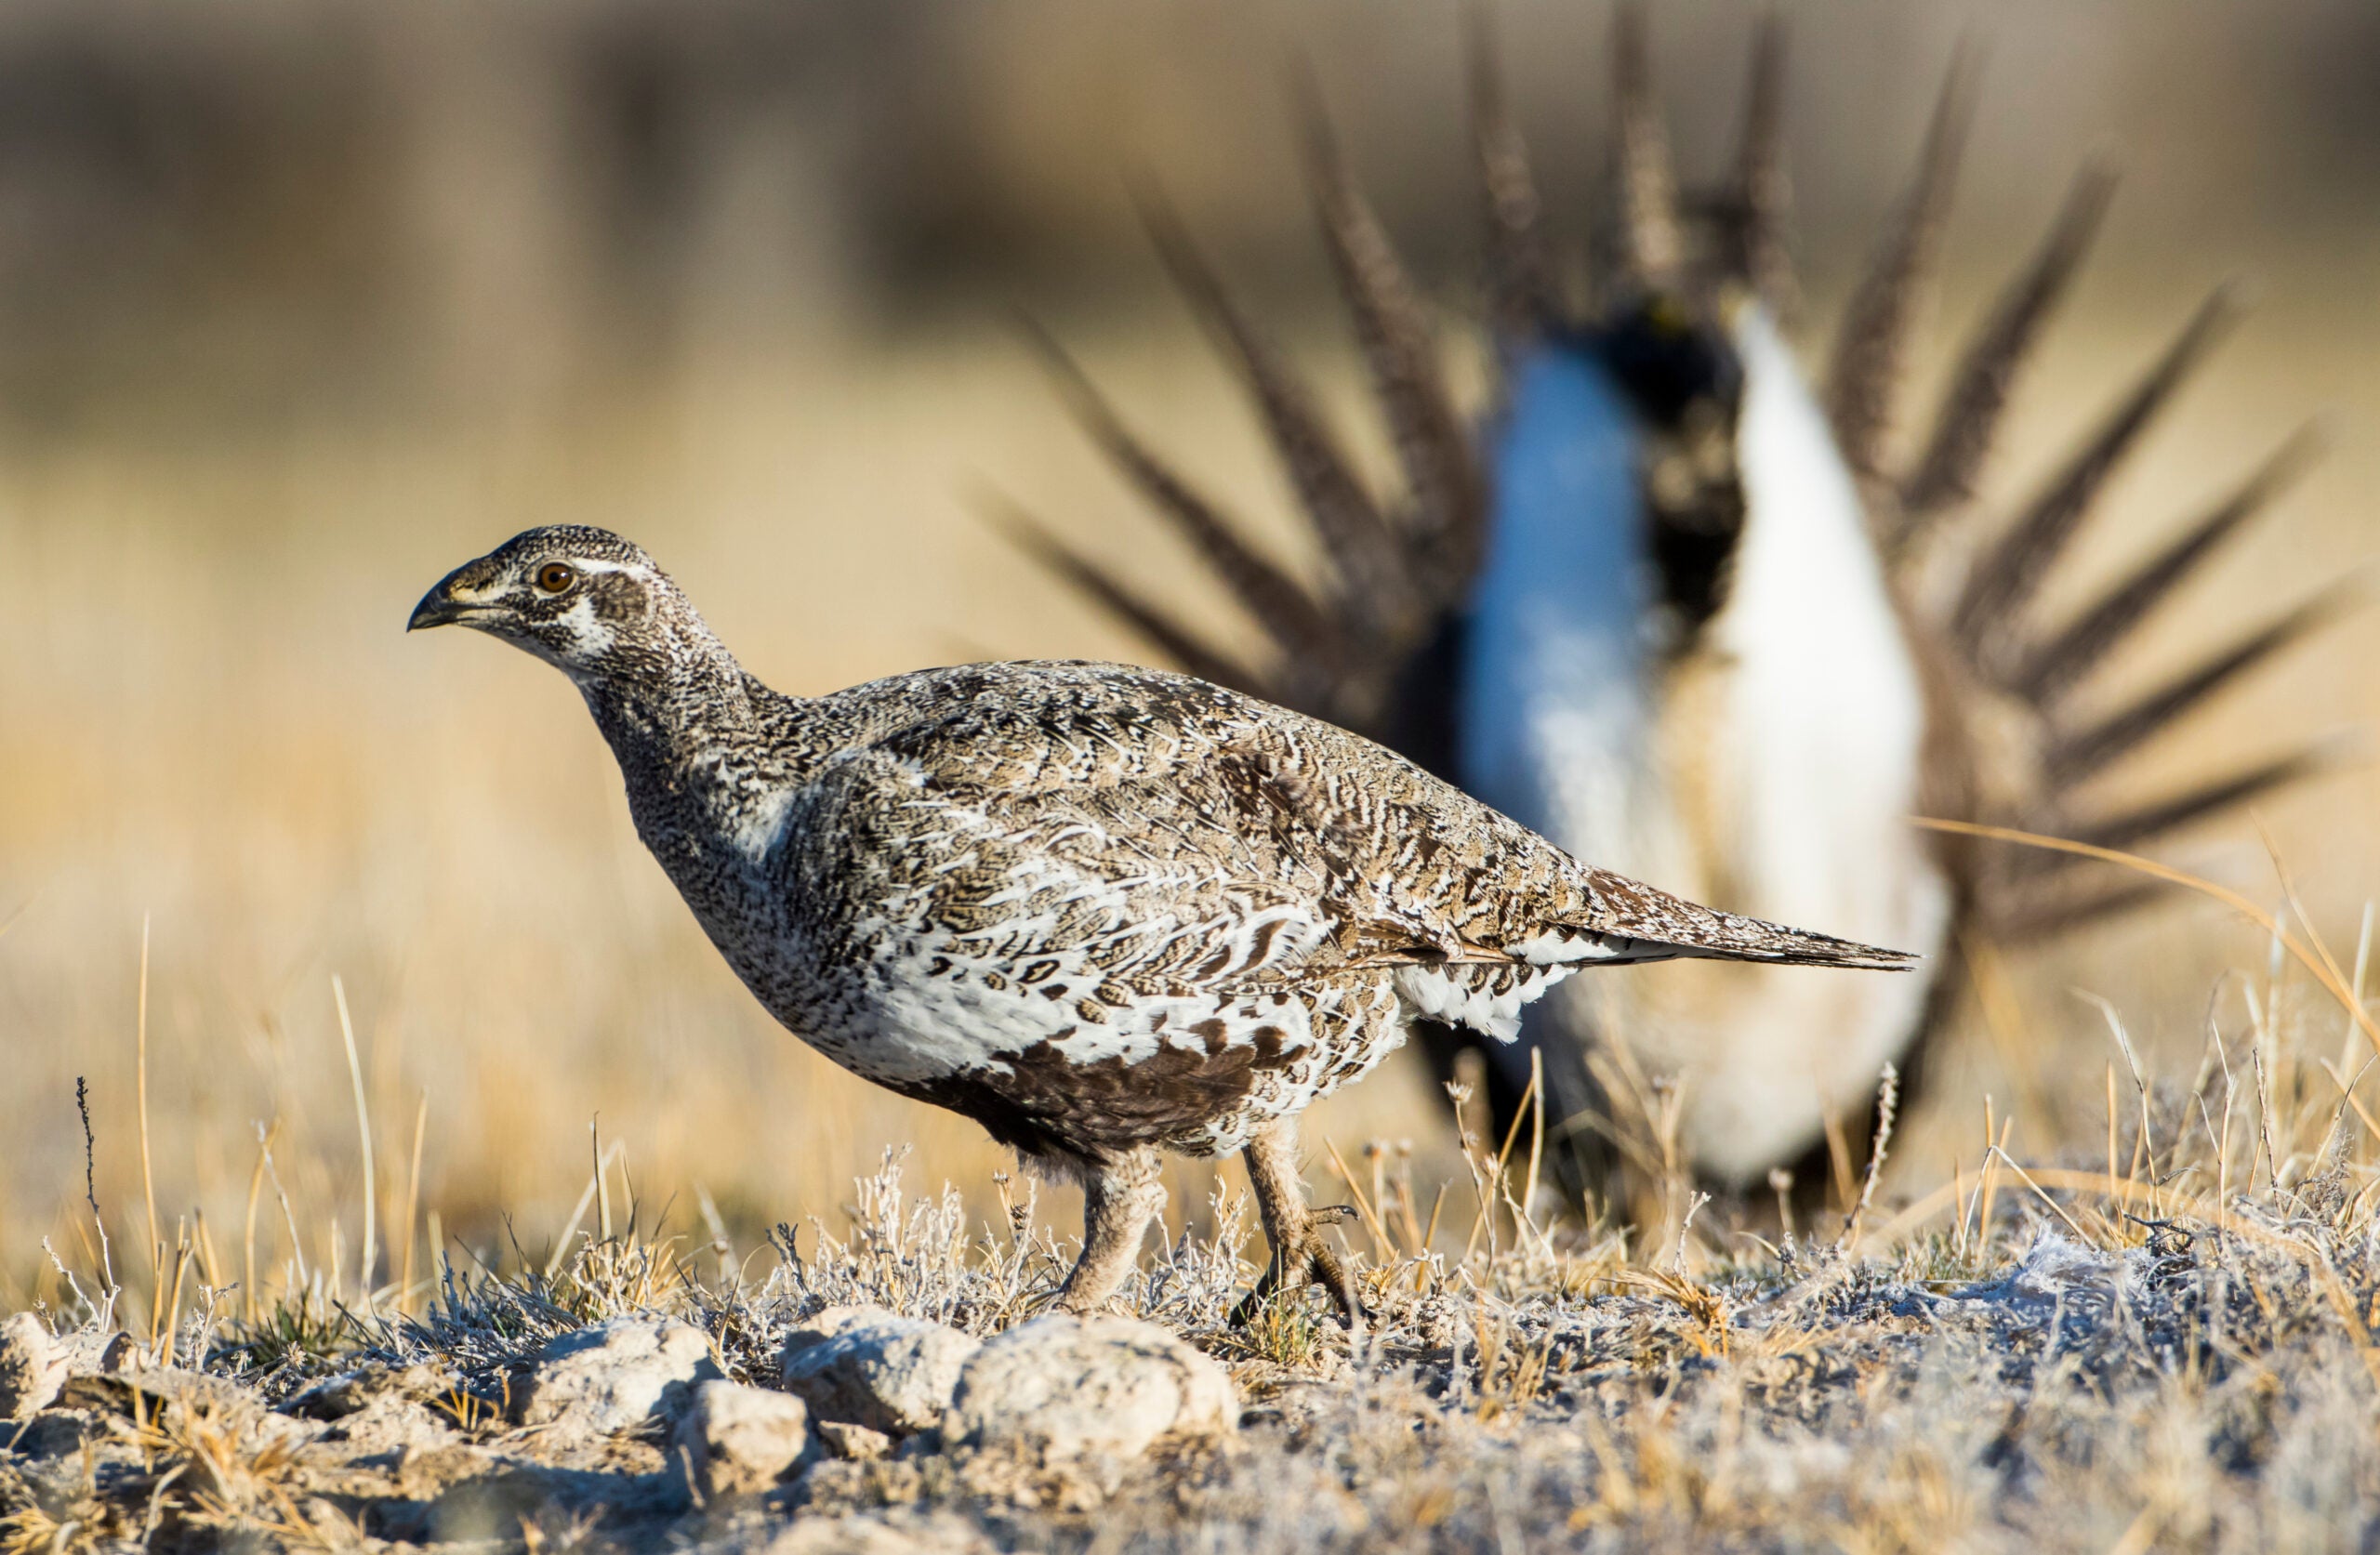 A female sage grouse walking on the prairie with a displaying male in the background